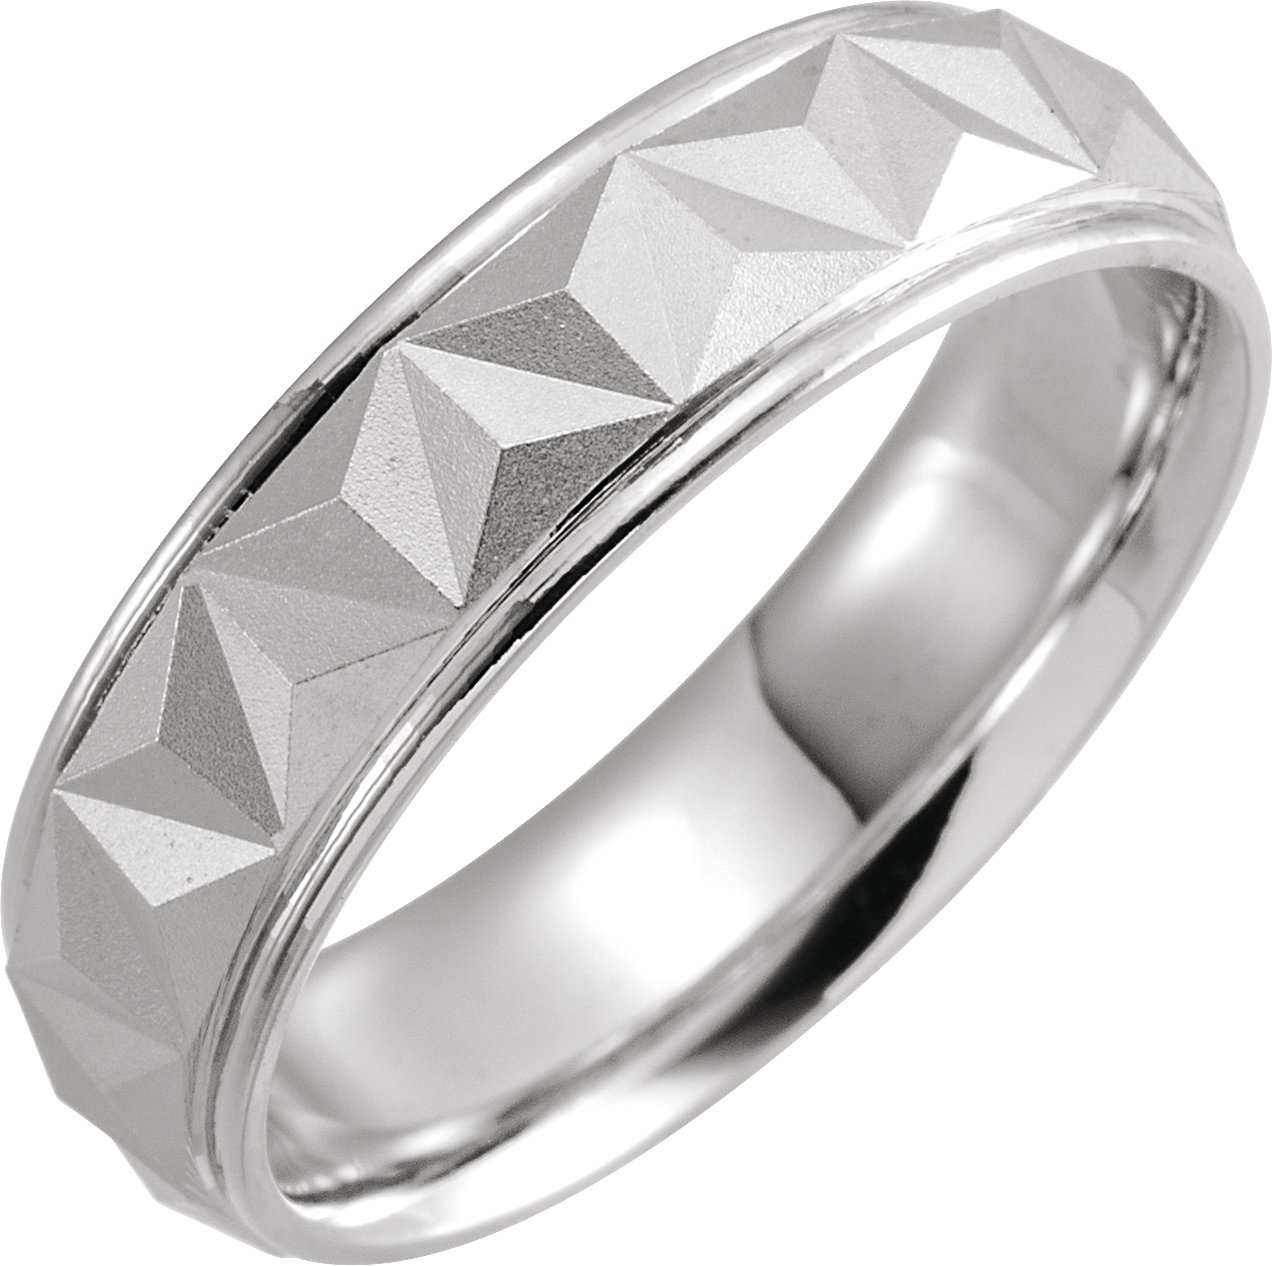 Continuum Sterling Silver 6 mm Geometric Band with Matte/Polished Finish Size 19.5